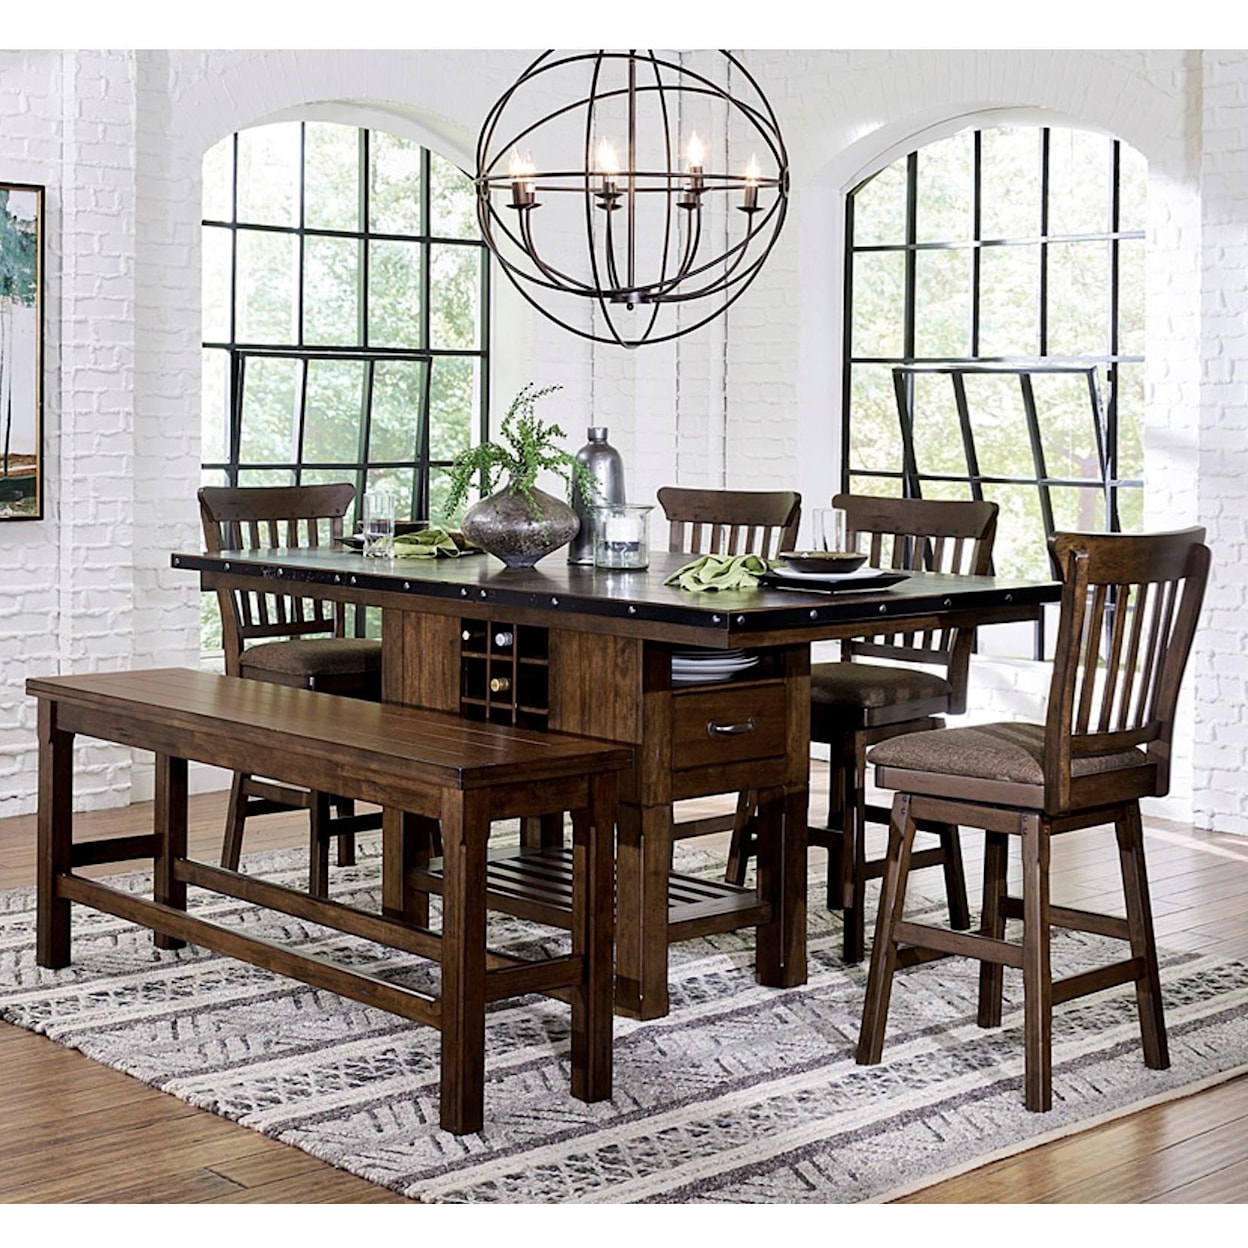 Homelegance Furniture Schleiger Table and Chair Set with Bench